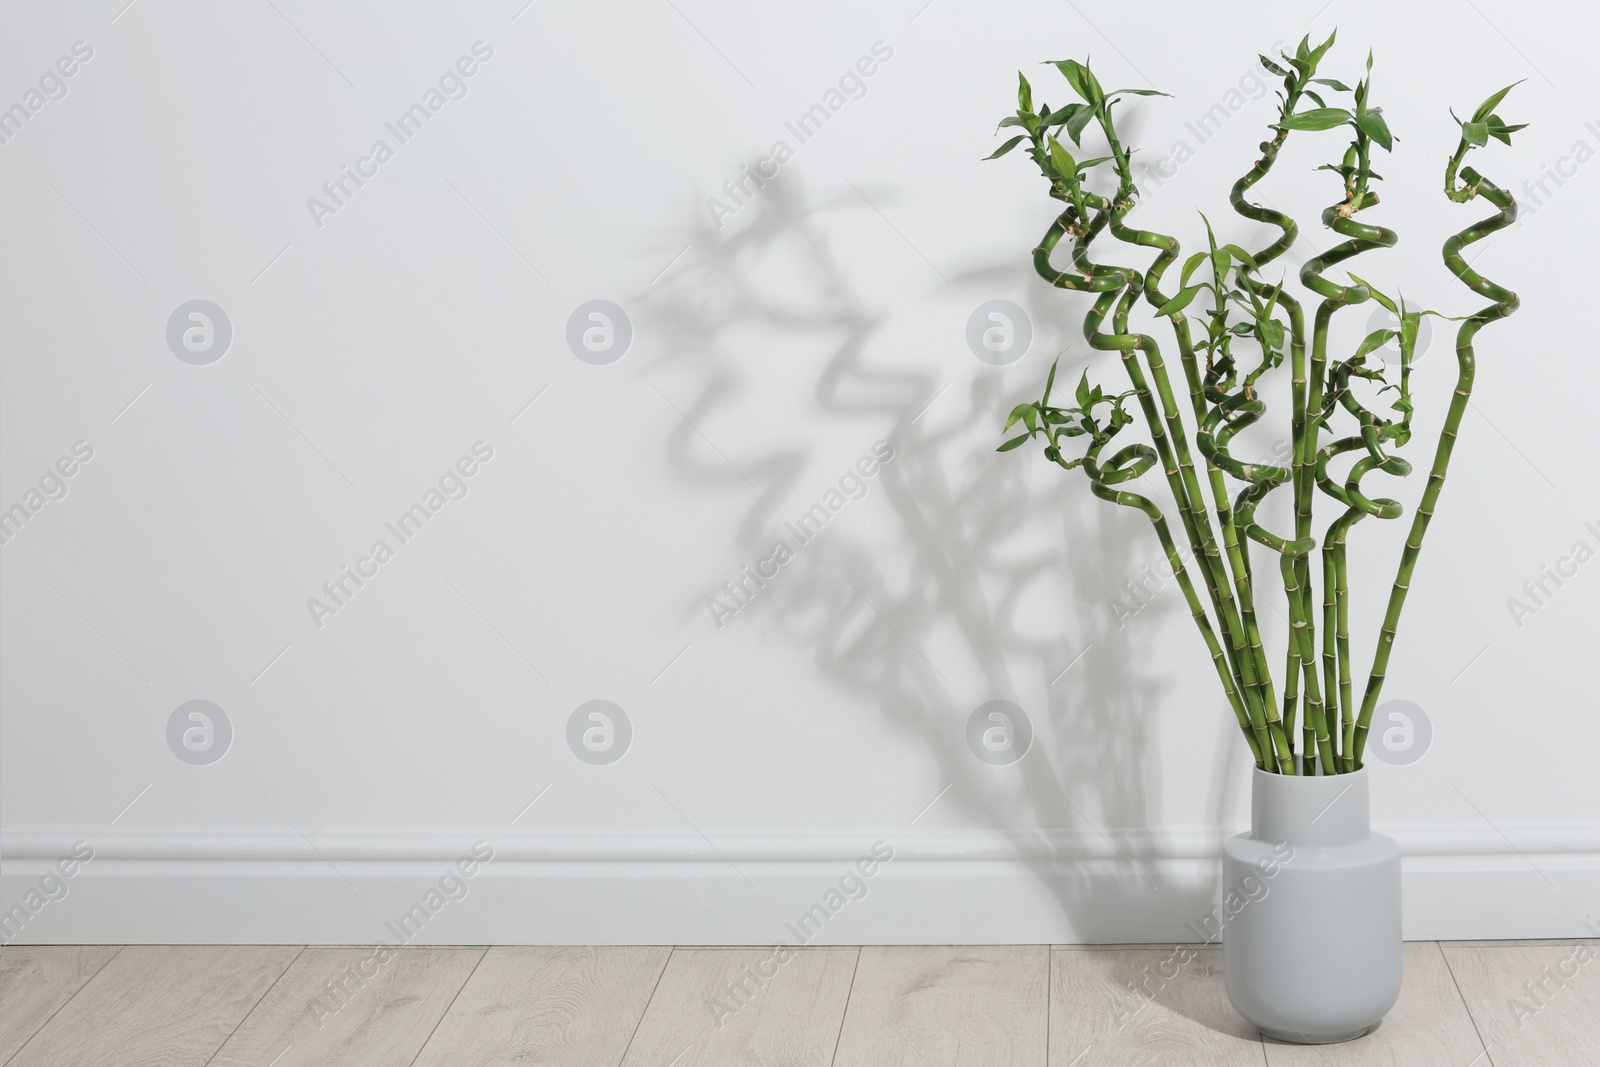 Photo of Vase with green bamboo on floor near light wall. Space for text